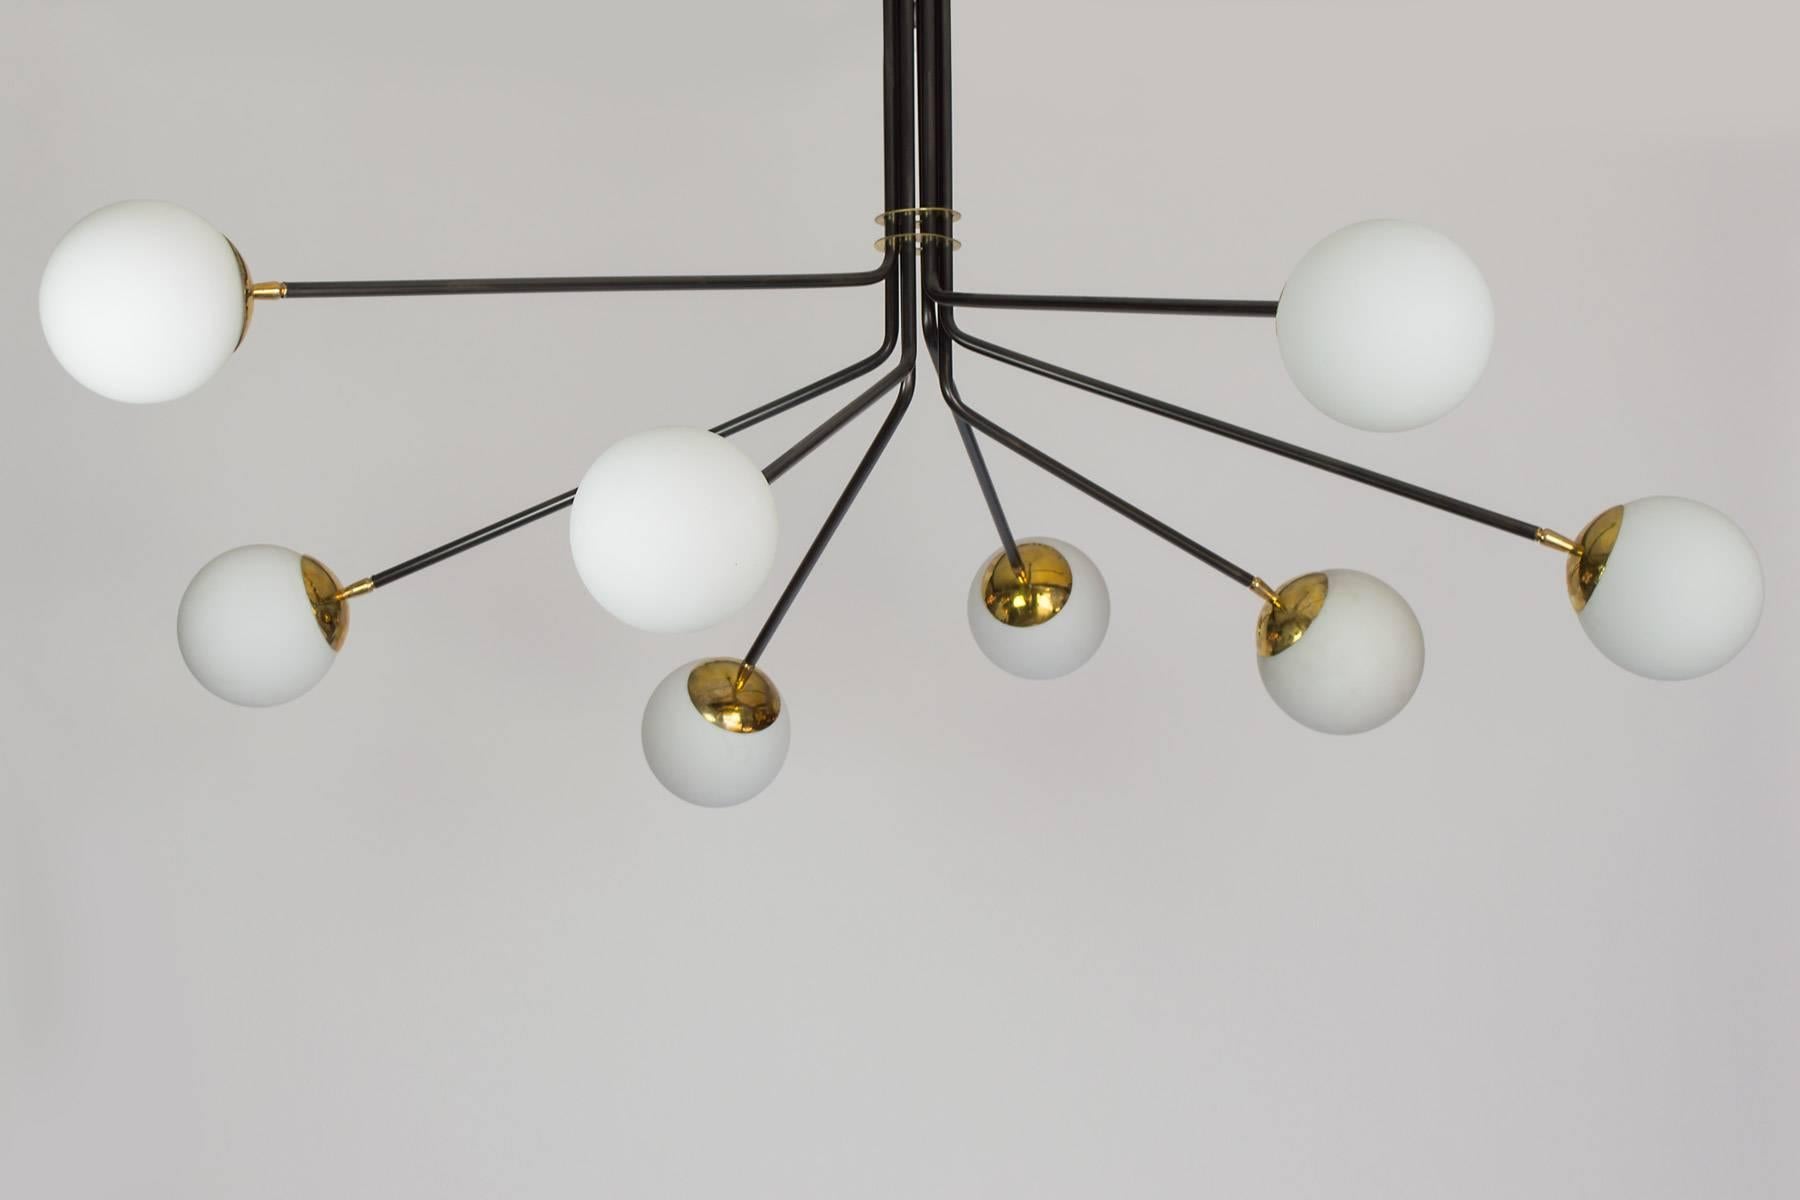 This chandelier combines brass, opaline glass and black enamel to create a wonderful midcentury inspired chandelier. The eight lights provide a lot of light, it is a large-scale chandelier which will work nicely in an entry or a dining room. The